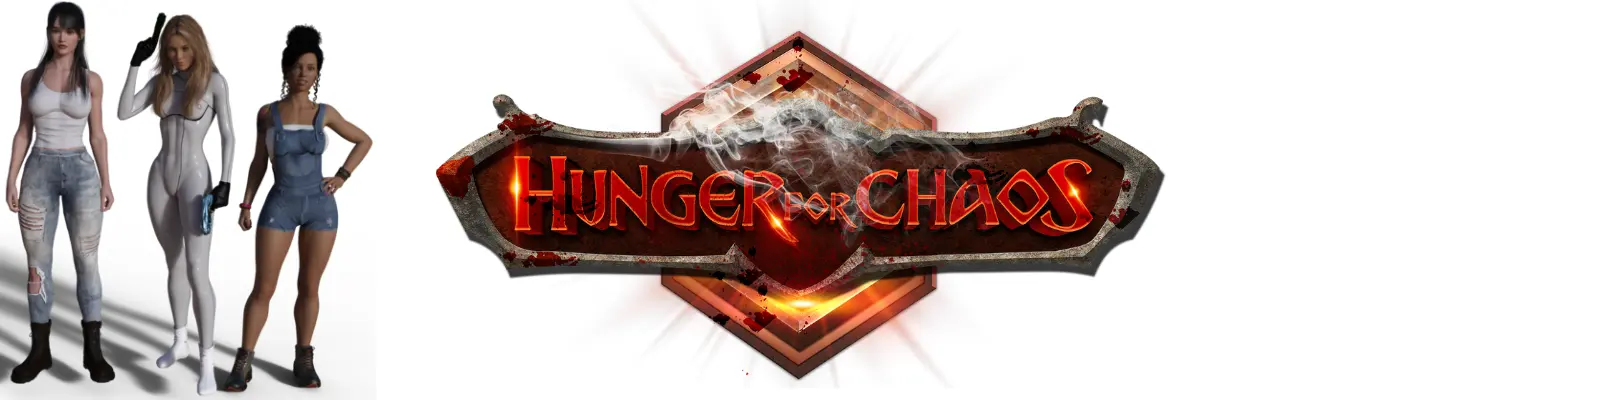 Hunger for Chaos main image